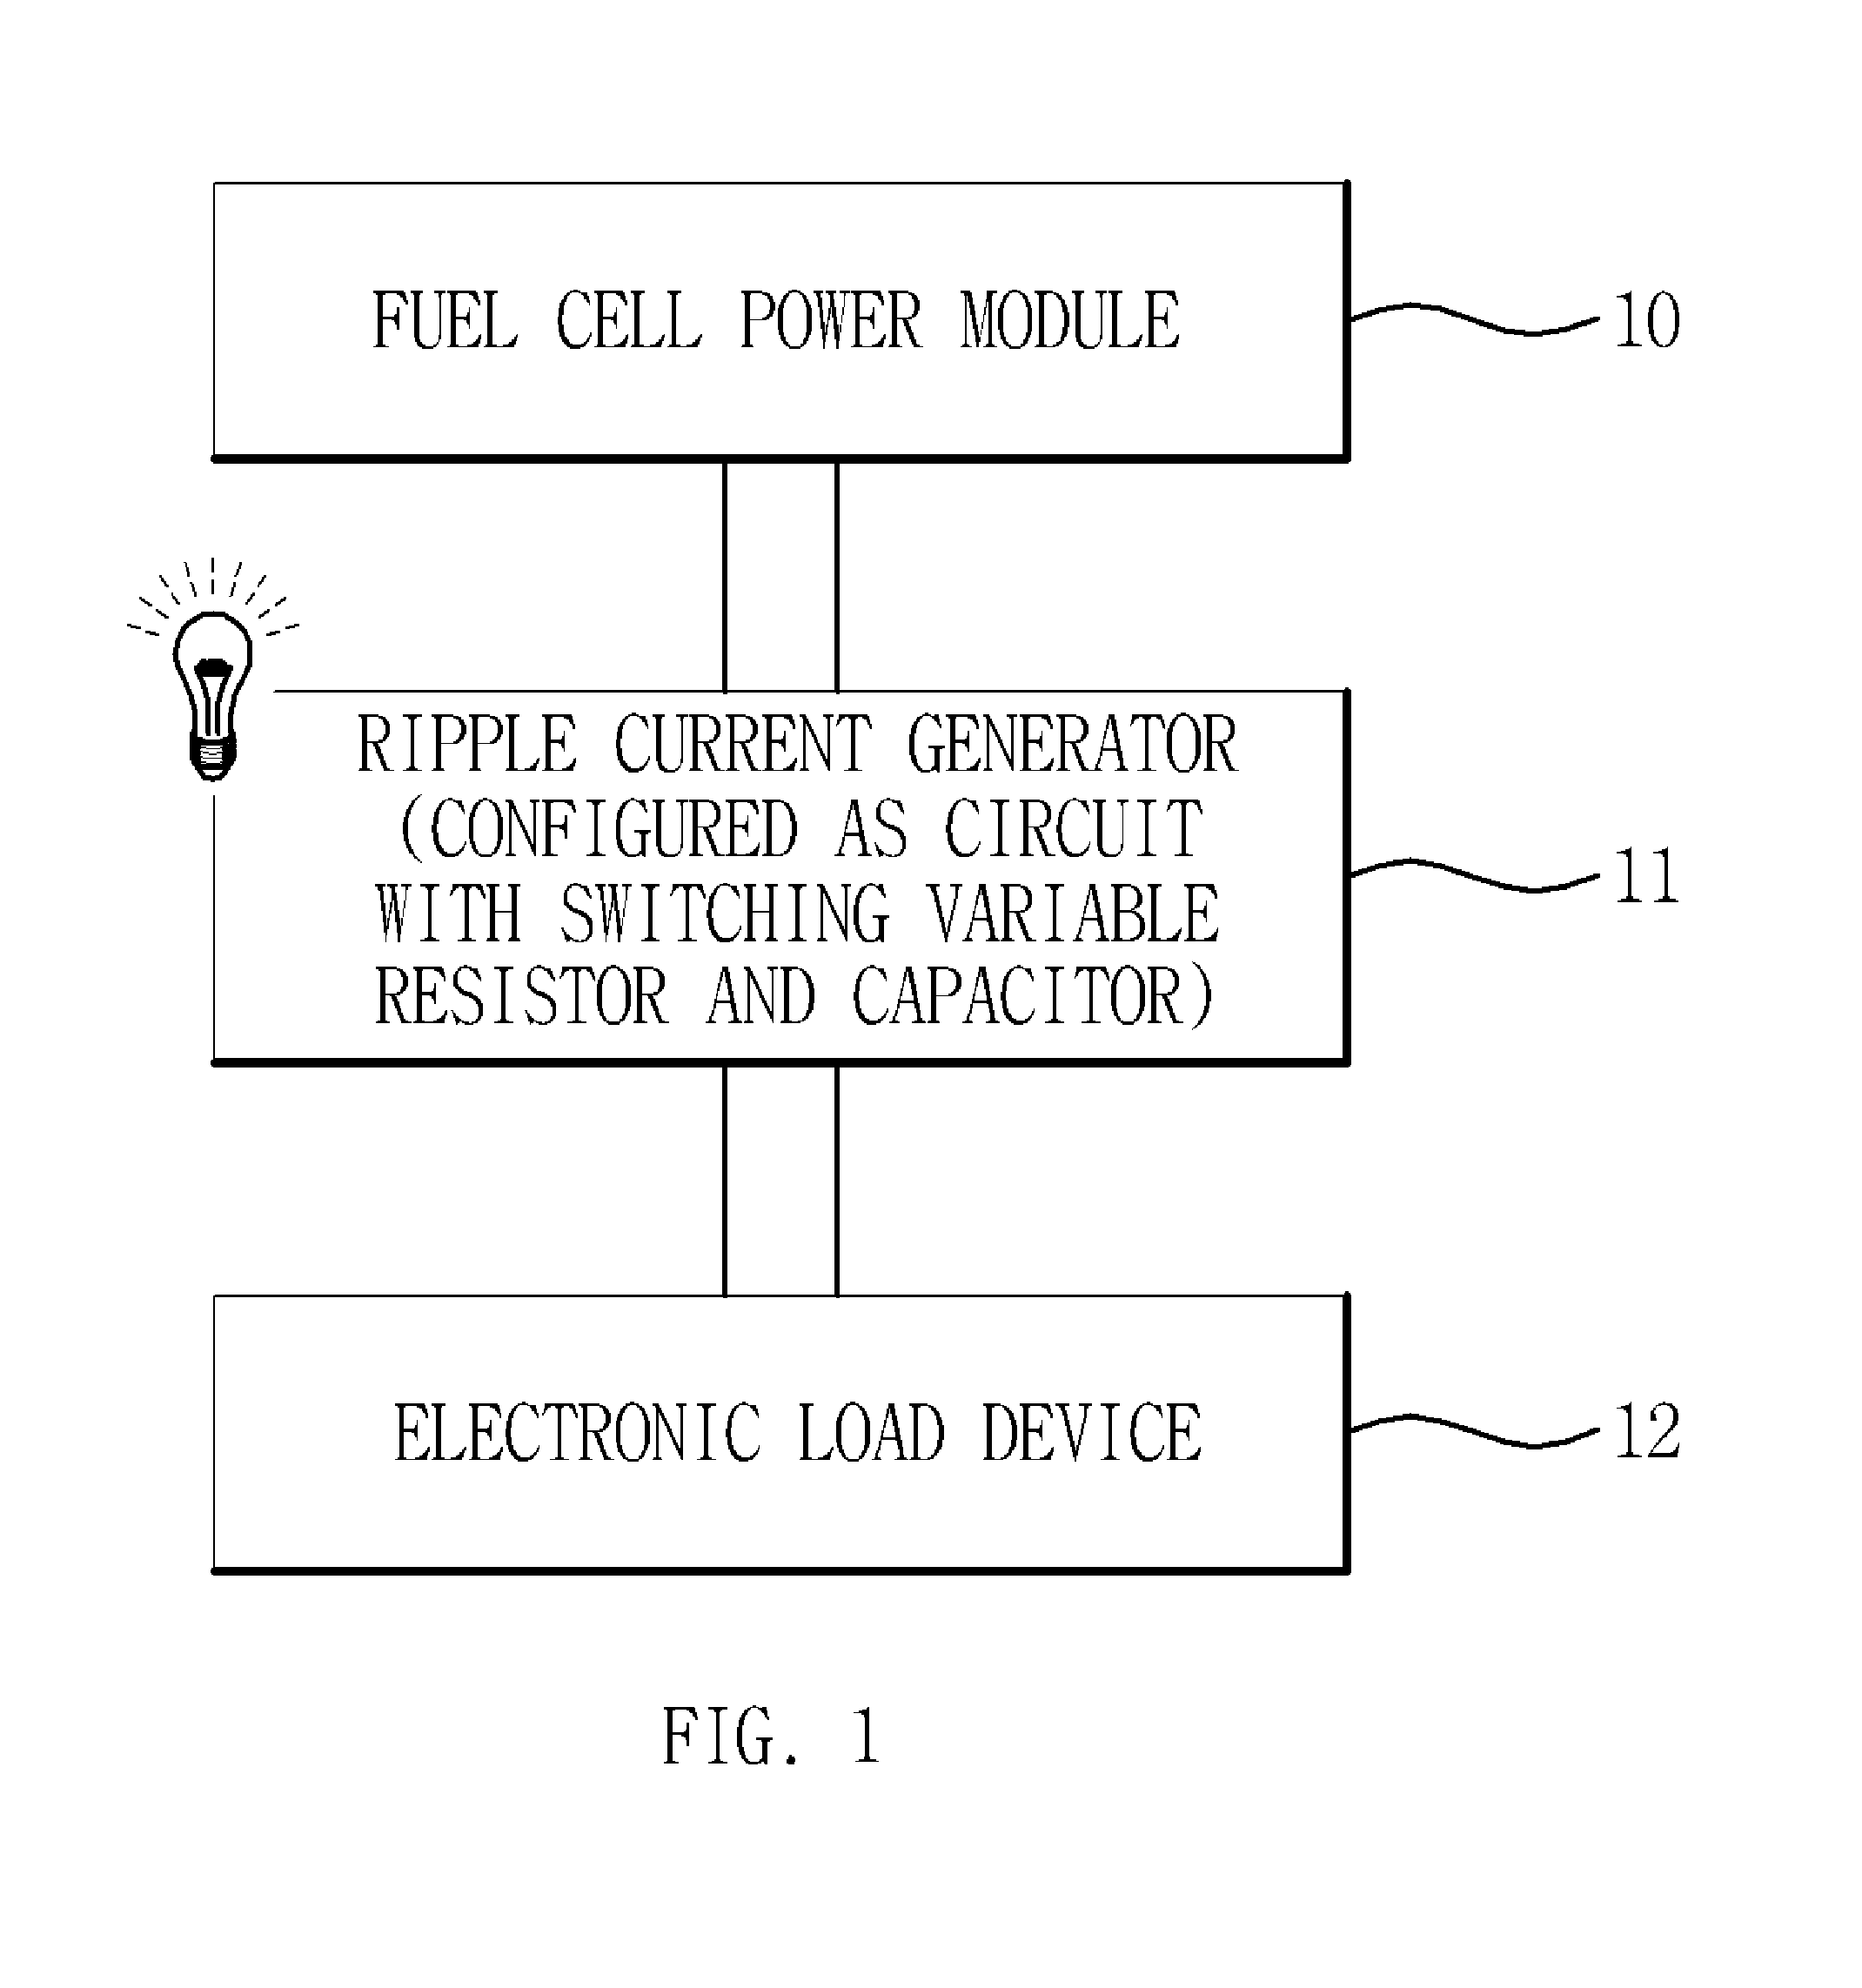 Motor power simulating apparatus for fuel cell power module evaluation